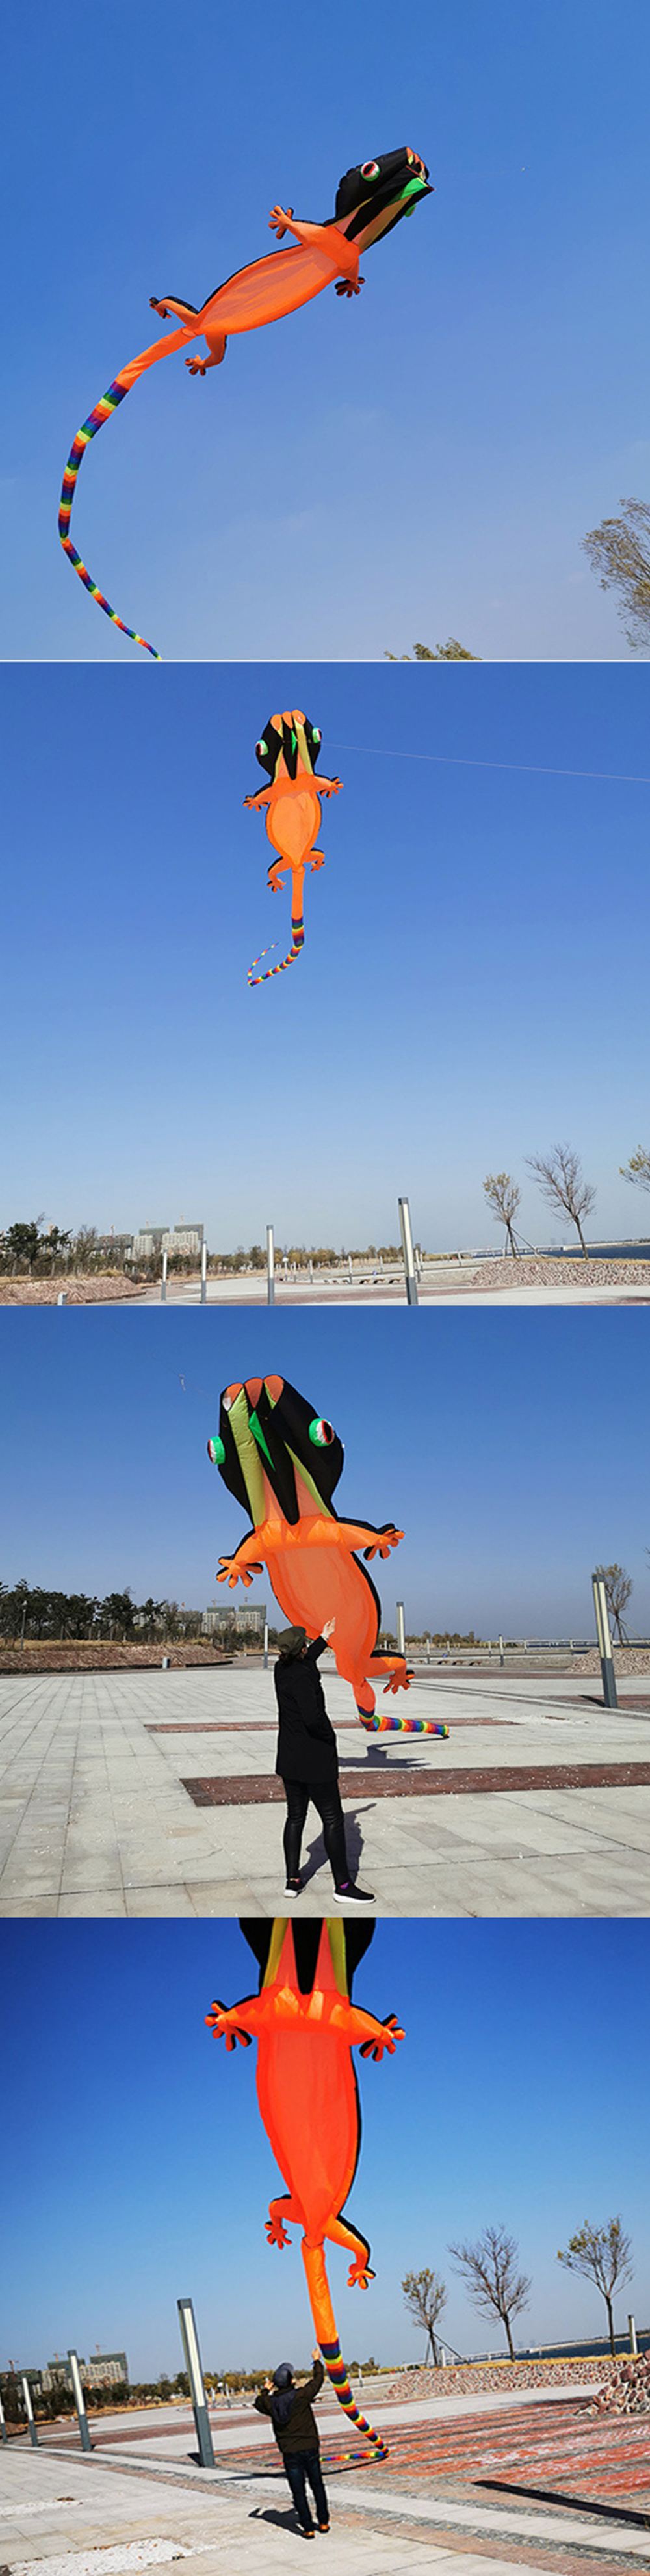 12m-Lizard-Gecko-Kite-Soft-Inflatable-Kite-Outdoor-Sports-Flying-Toy-Adult-Single-Line-Kite-Children-1830635-2